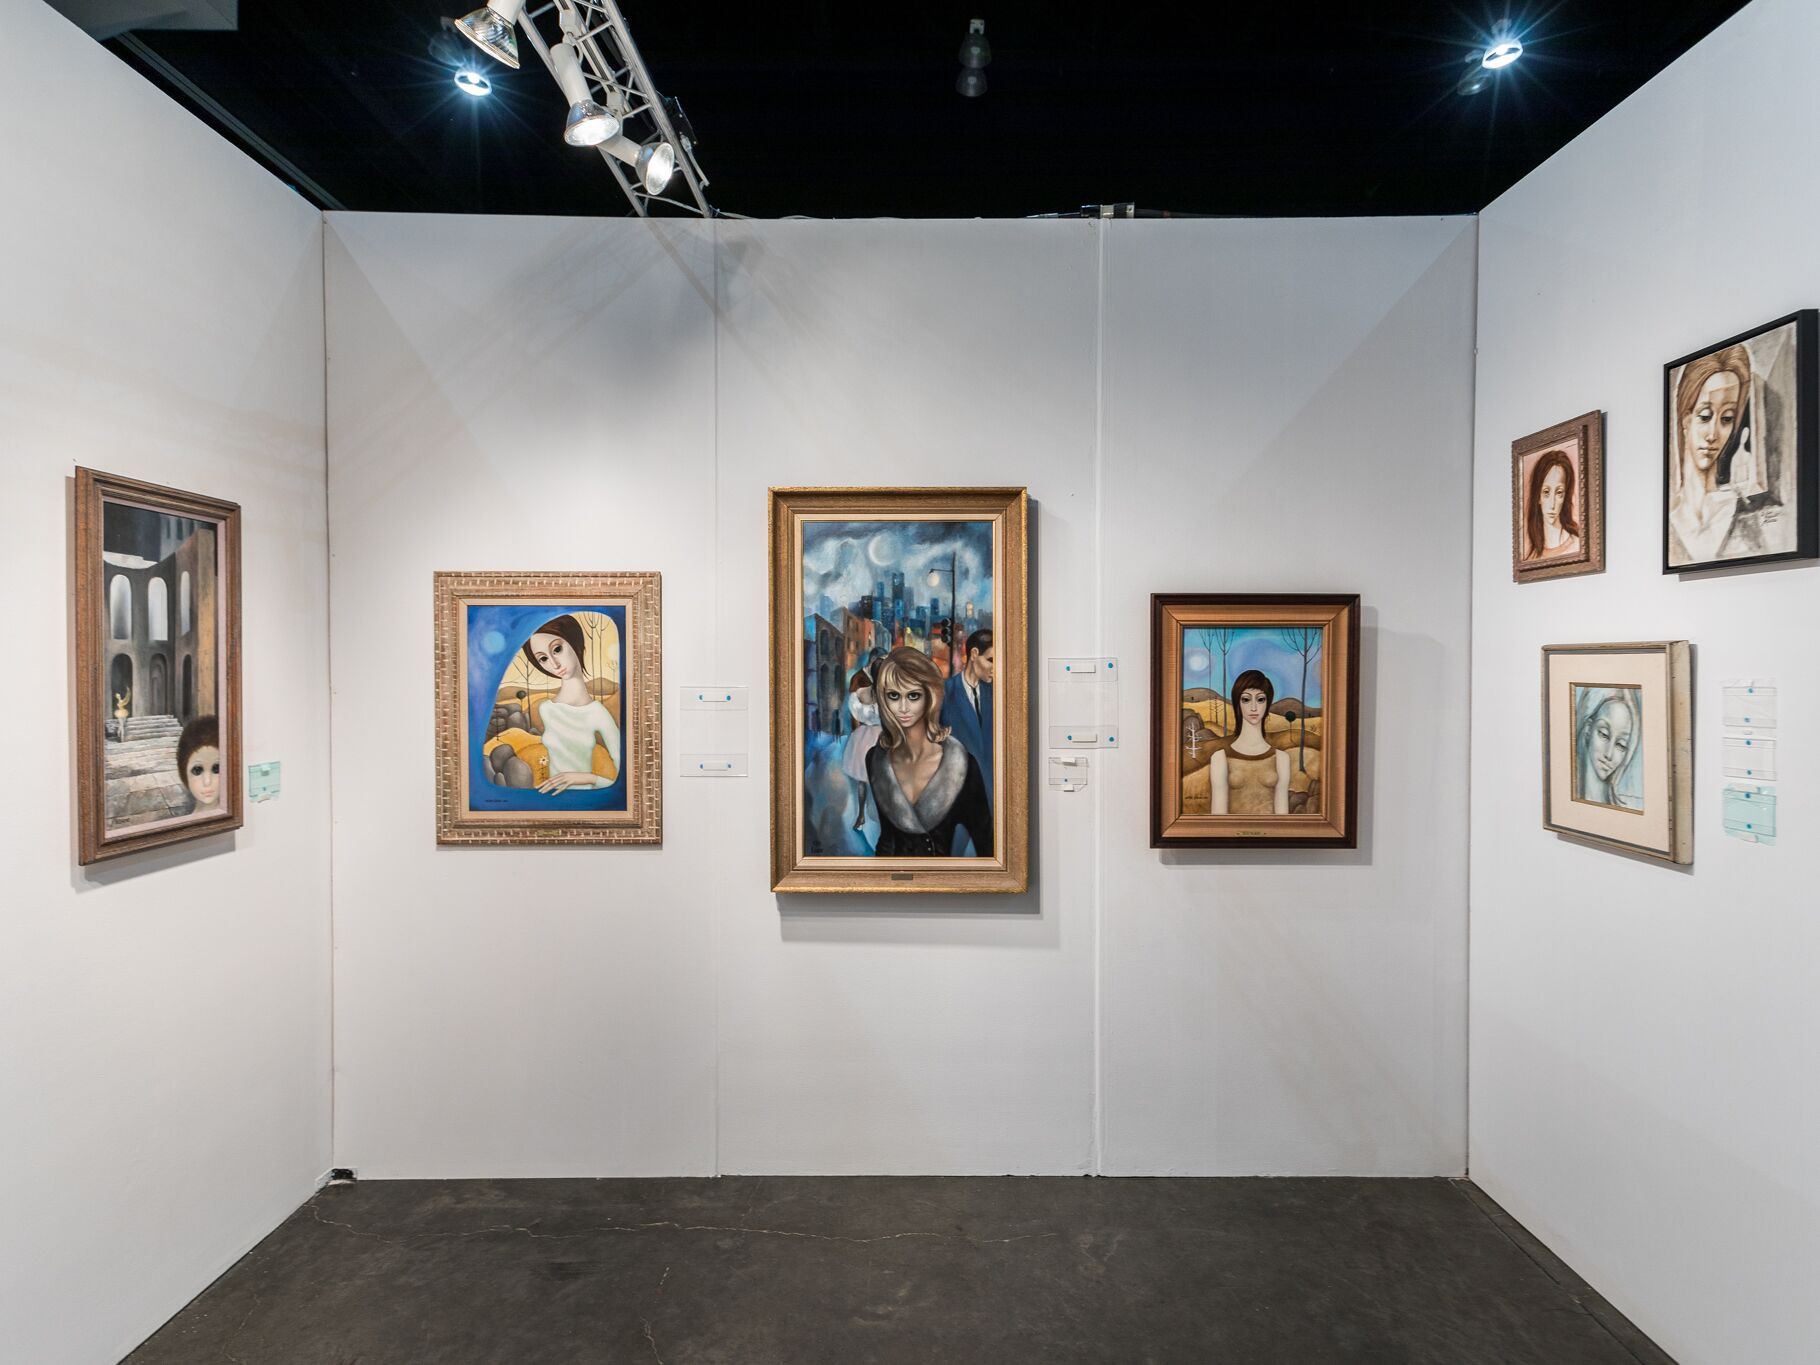 Some paintings by Margaret Keane, who was awarded the Lifetime Achievement Award for her innumerable contributions to art, as well as her long struggle to receive credit for her work, which was chronicled and dramatized in Tim Burton